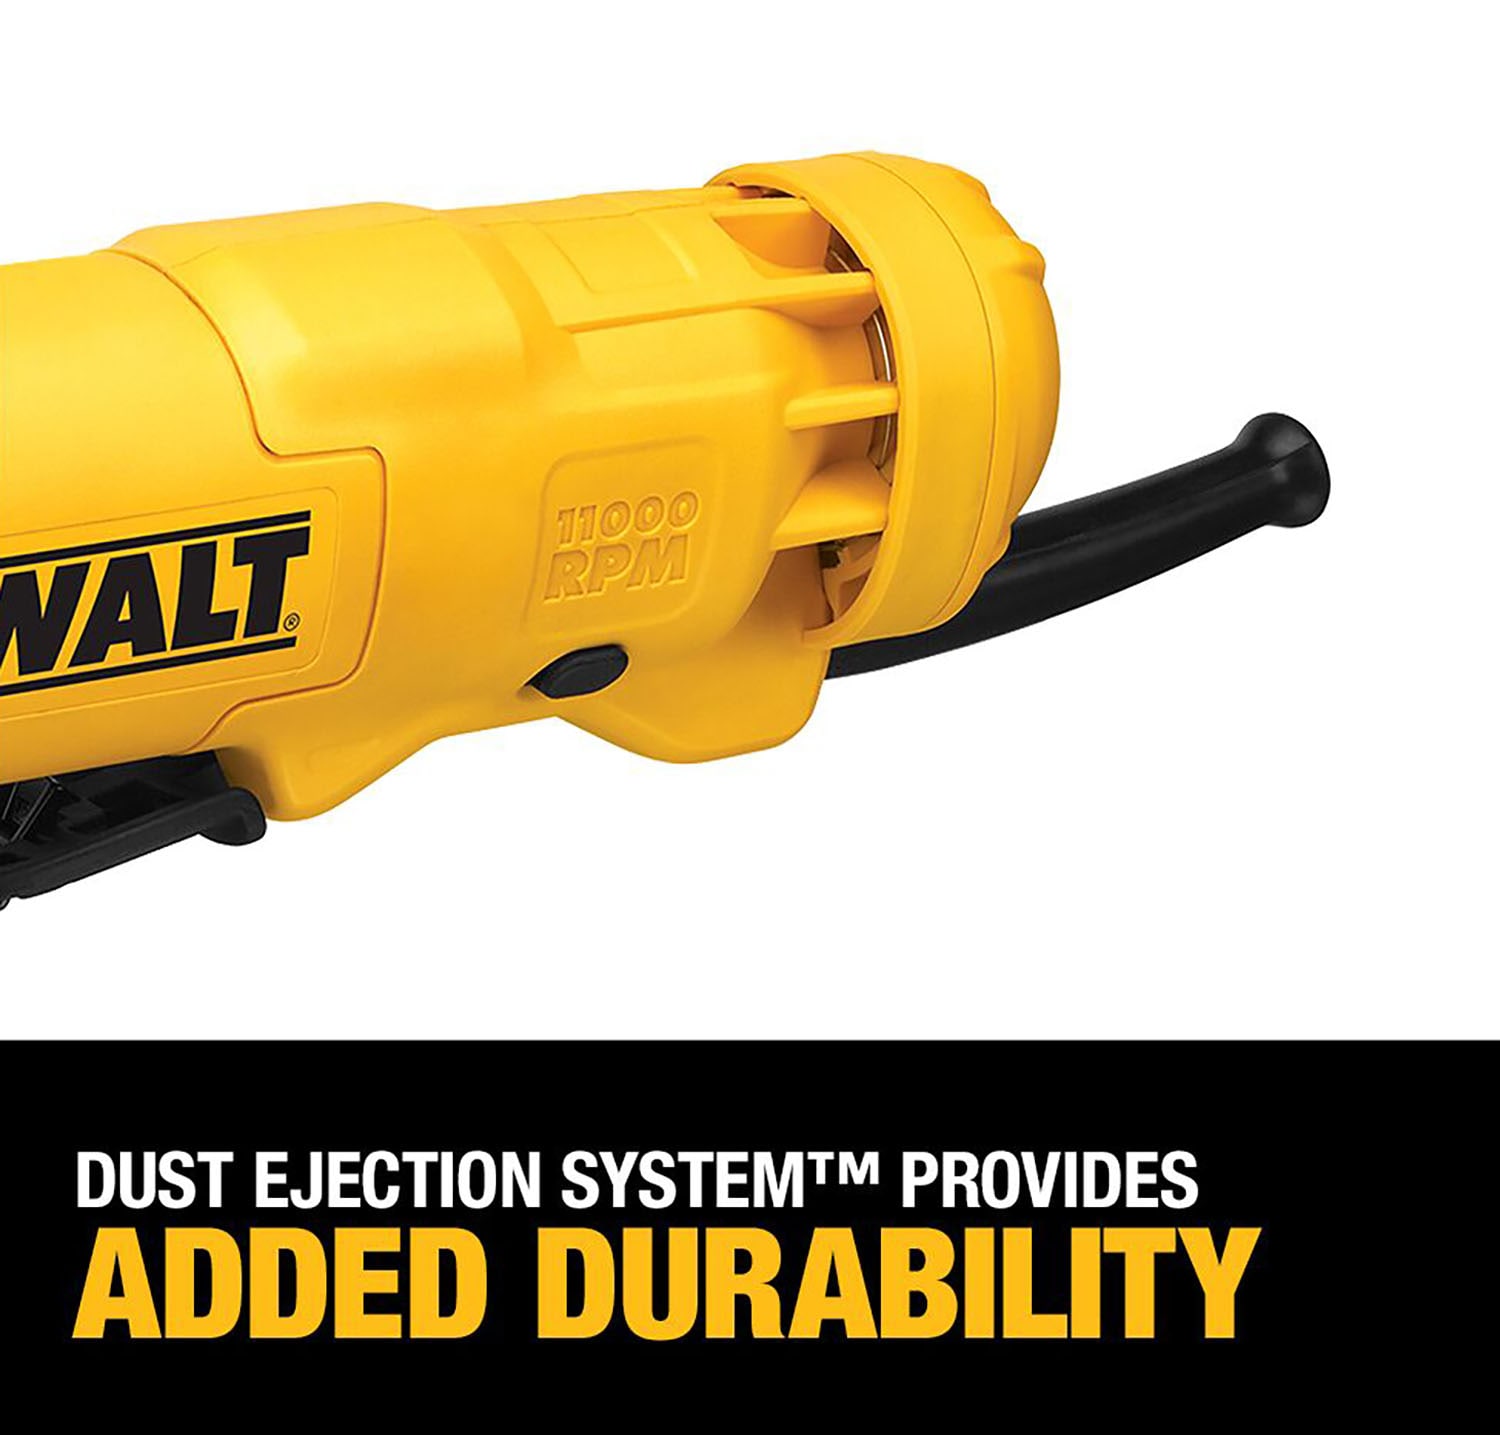 DEWALT 4-1/2 Small Angle Grinder With One-Touch Guard DWE4011 - JMP Wood